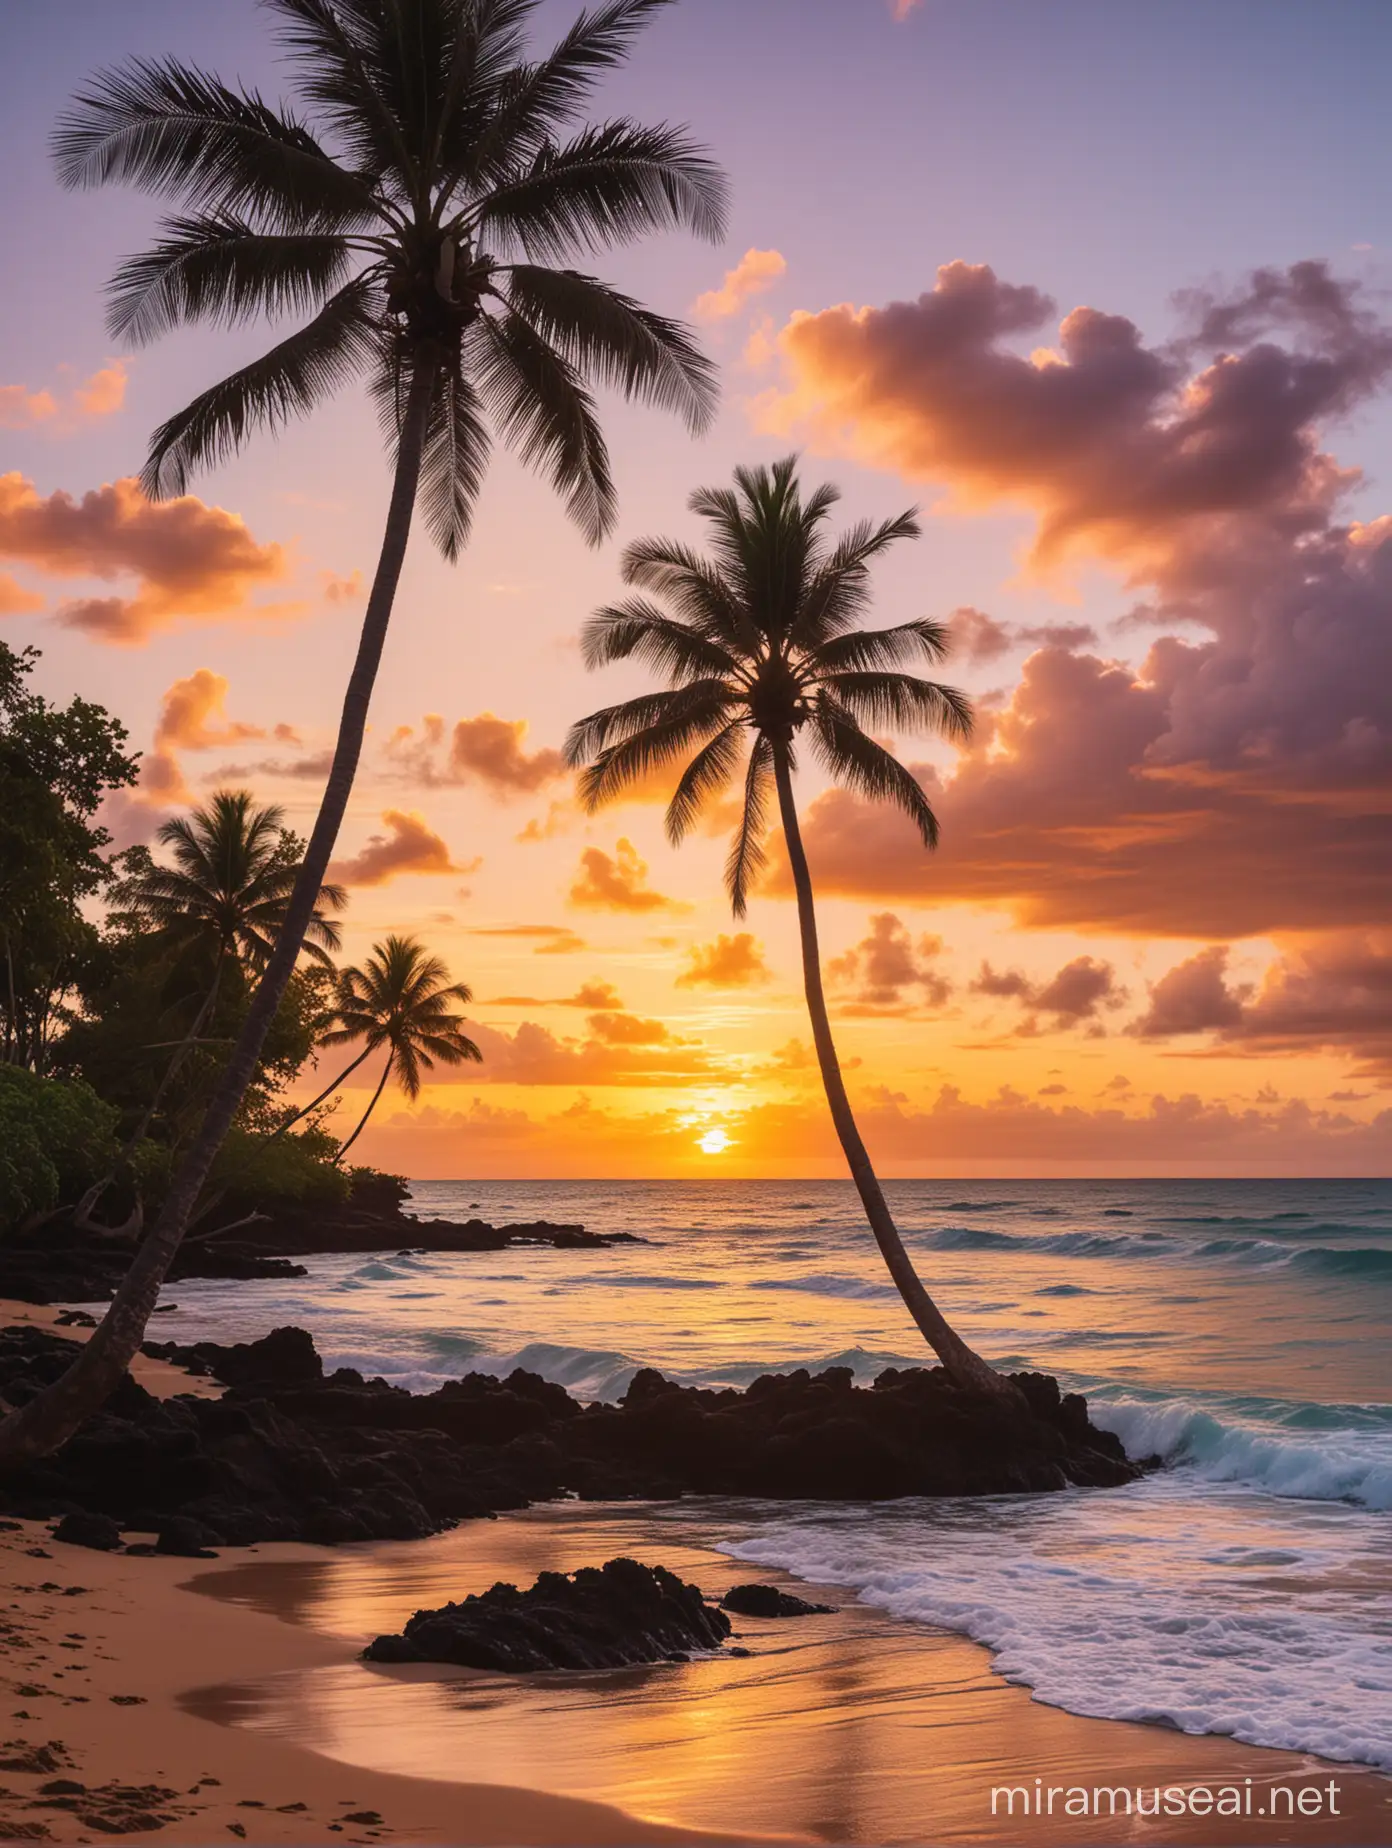 Sunset Serenity in Hawaii with Nostalgic Charm and Vibrant Colors